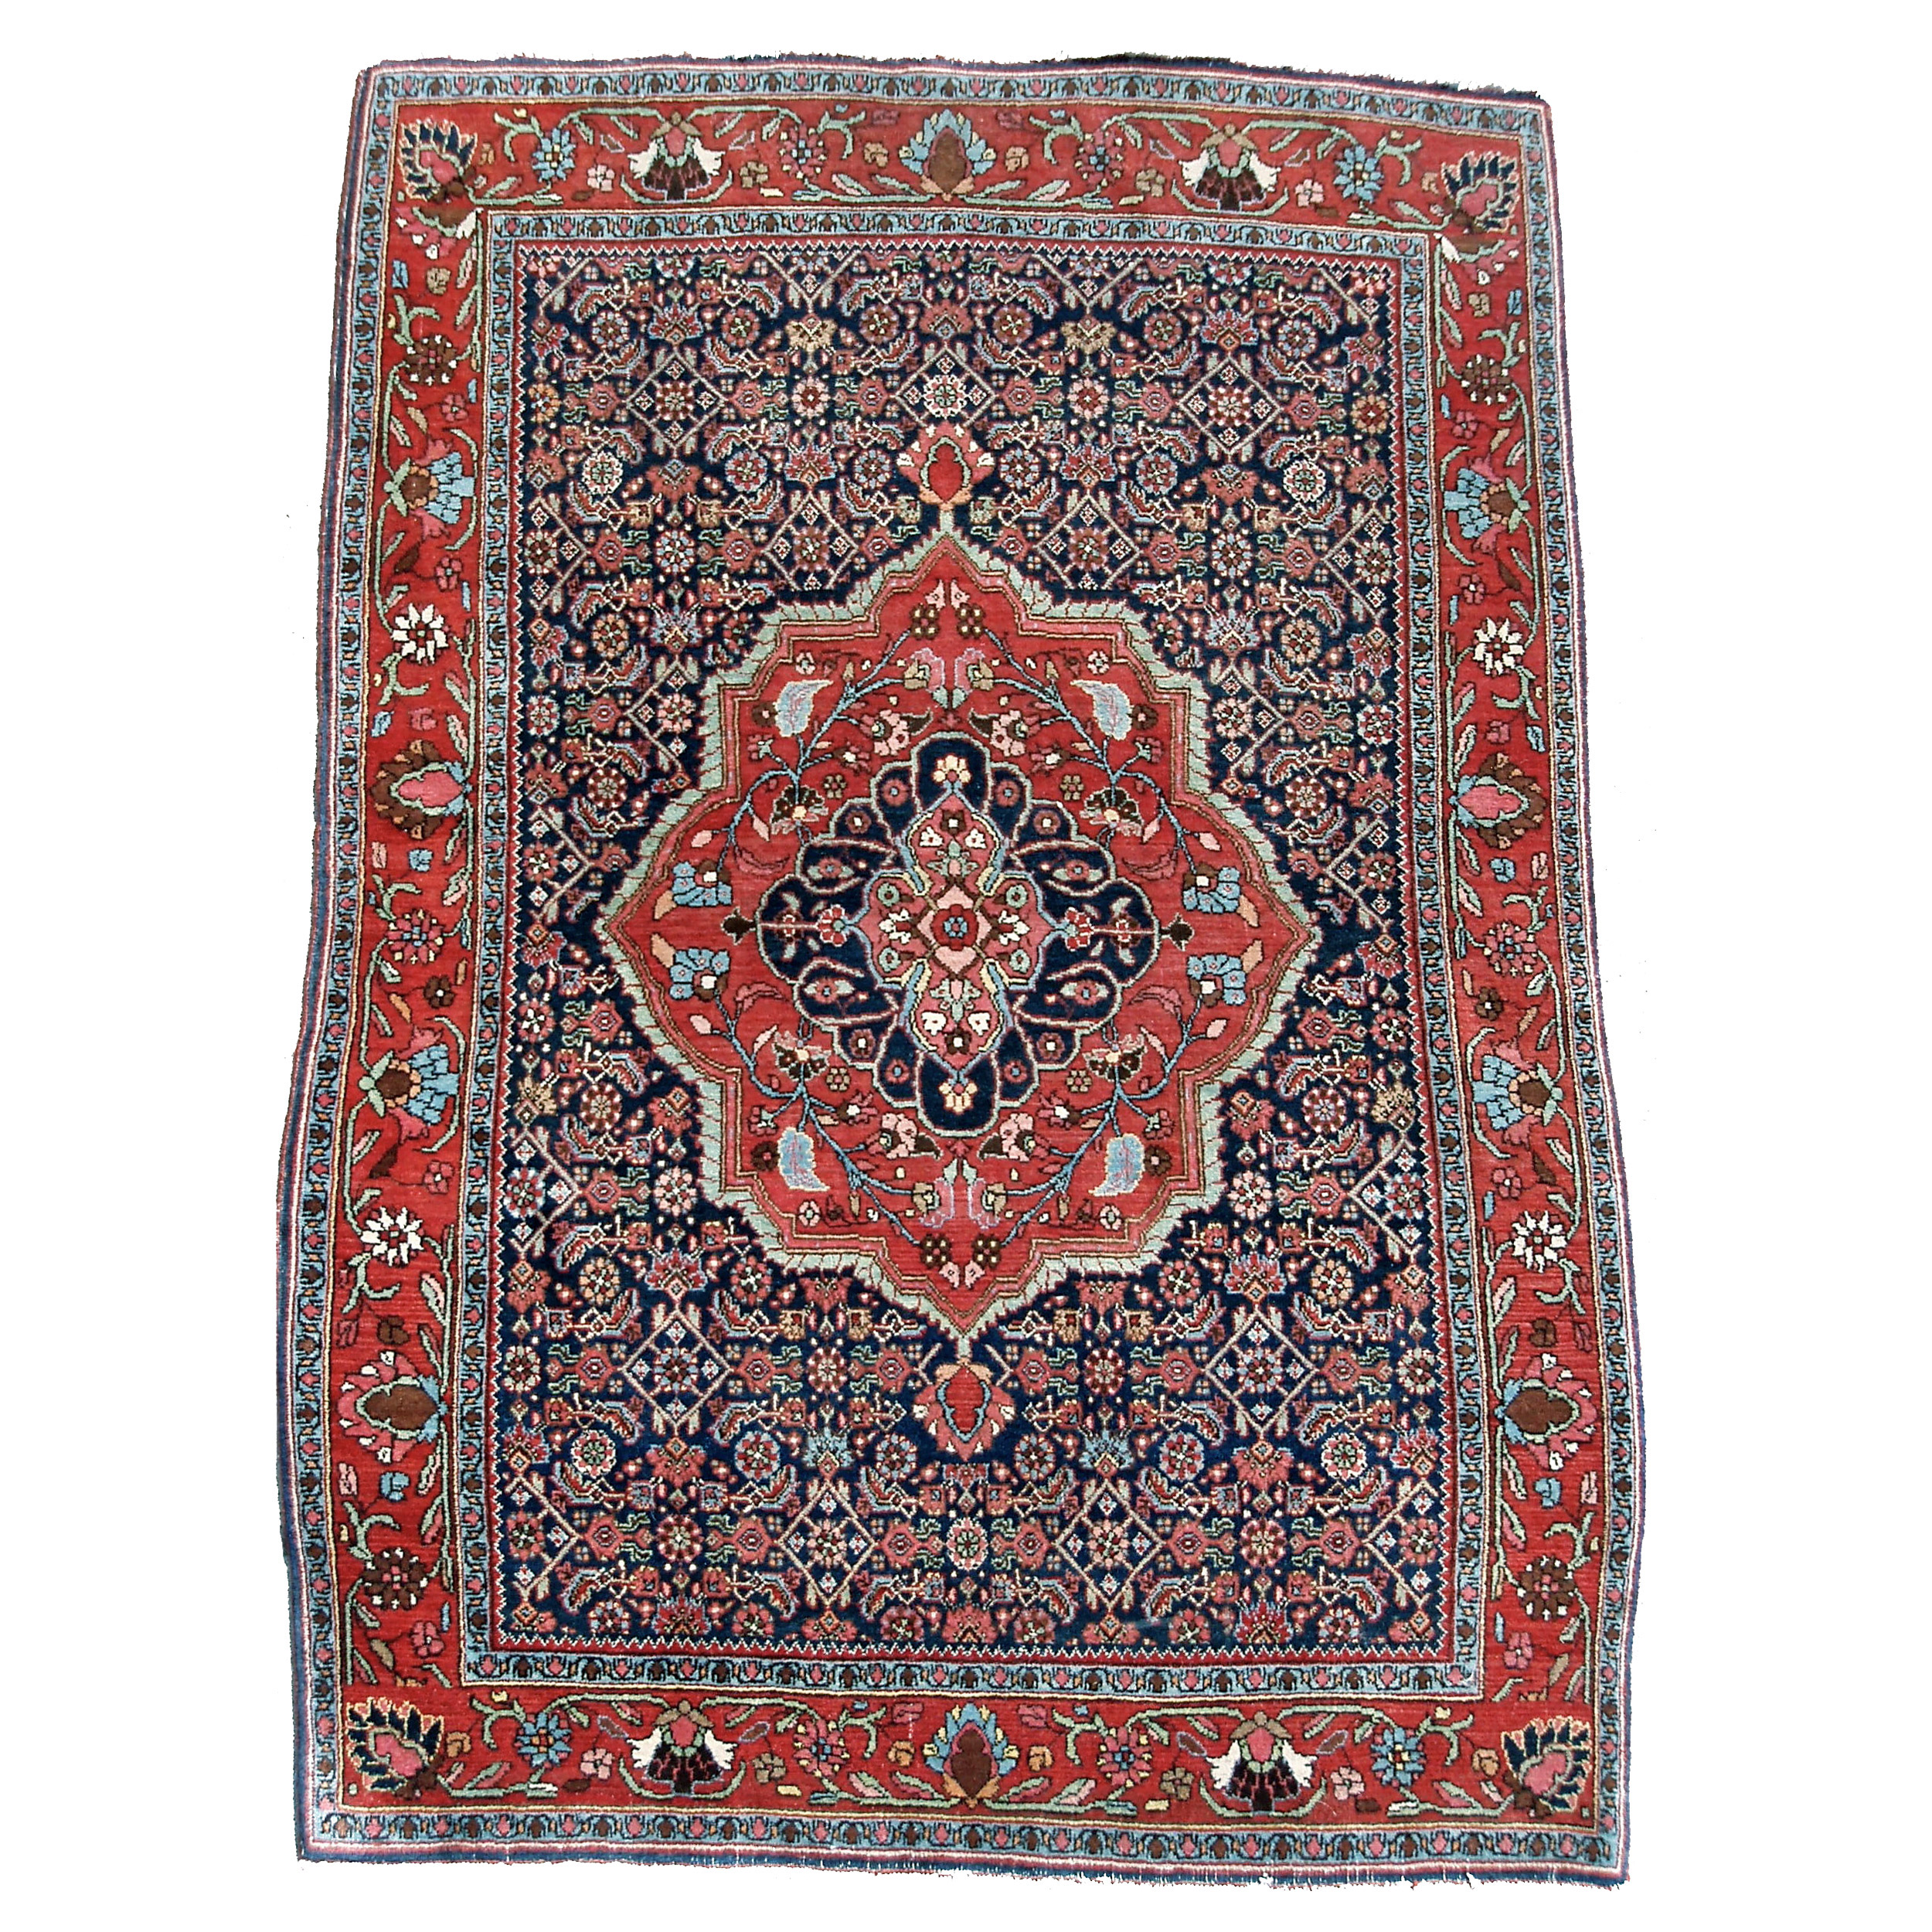 Antique Persian Bidjar rug with a terra cotta color medallion on a navy blue field that is decorated with the classical Herati design, Douglas Stock Gallery Antique Oriental Rug Research Archives, antique rugs Boston,MA area